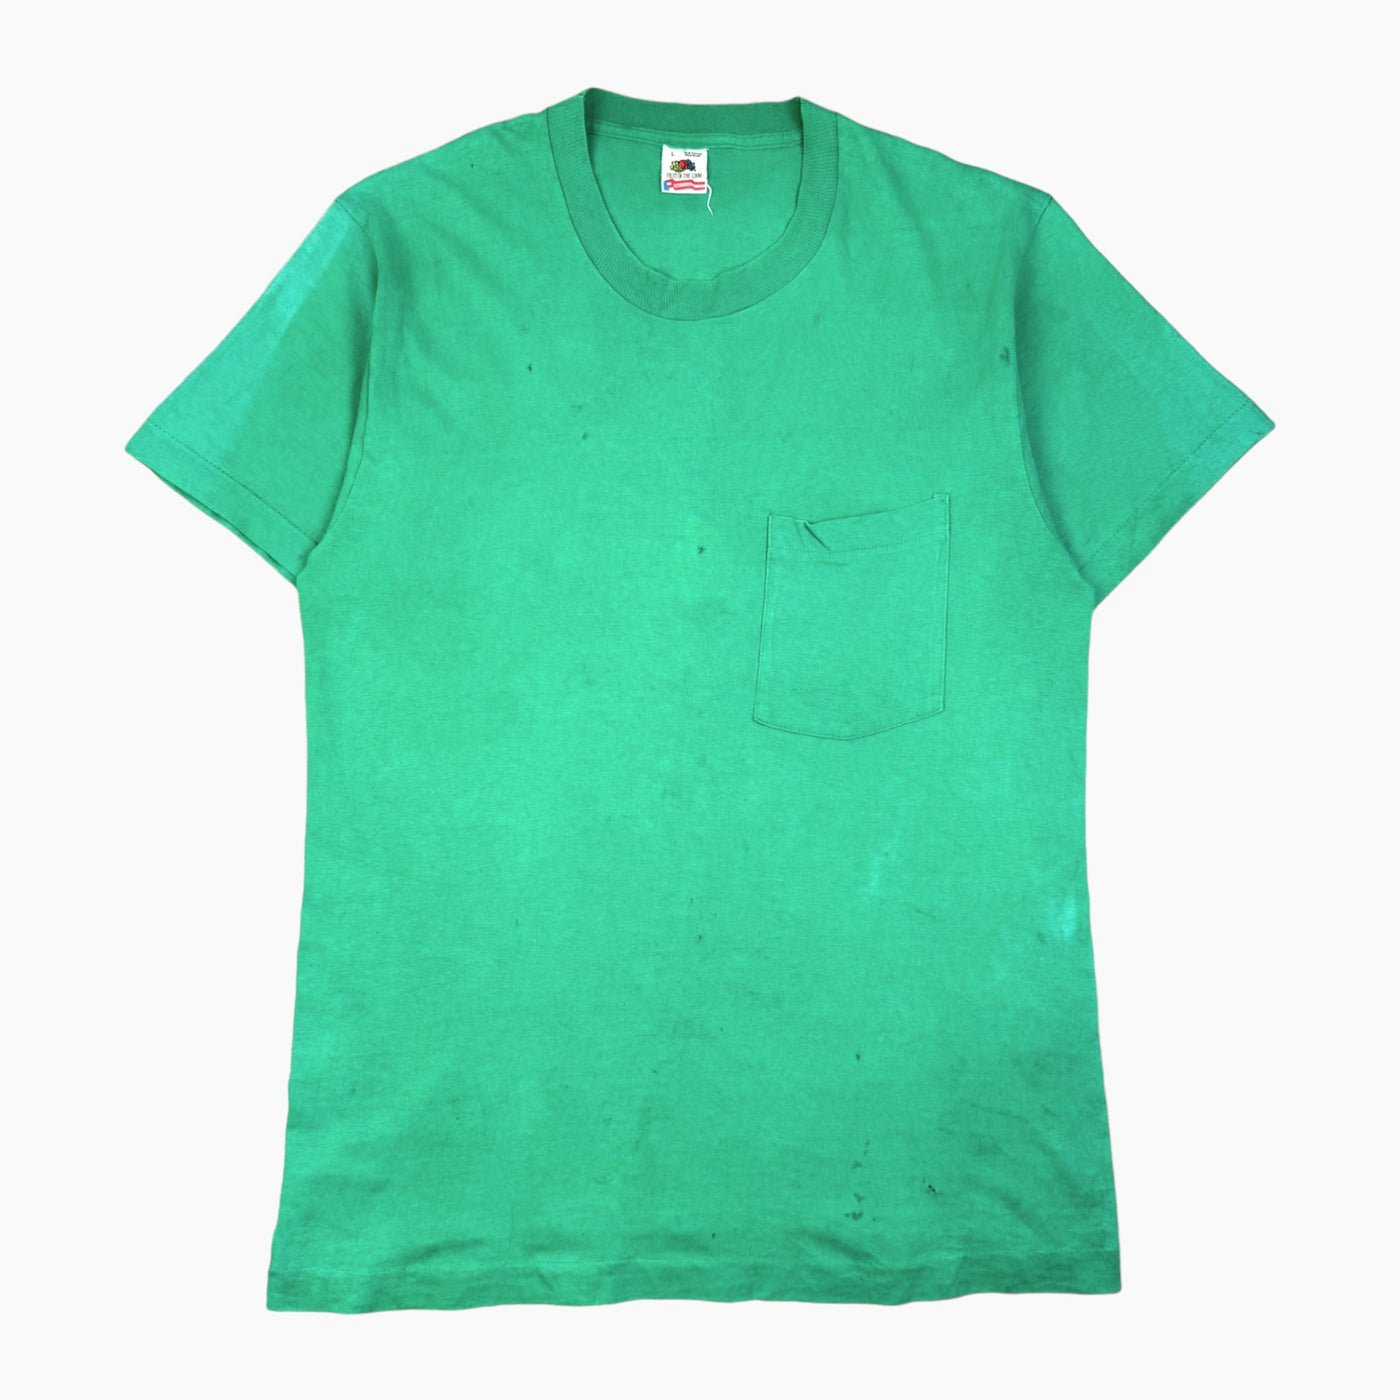 EARLY 90s FADED GREEN POCKET T-SHIRT